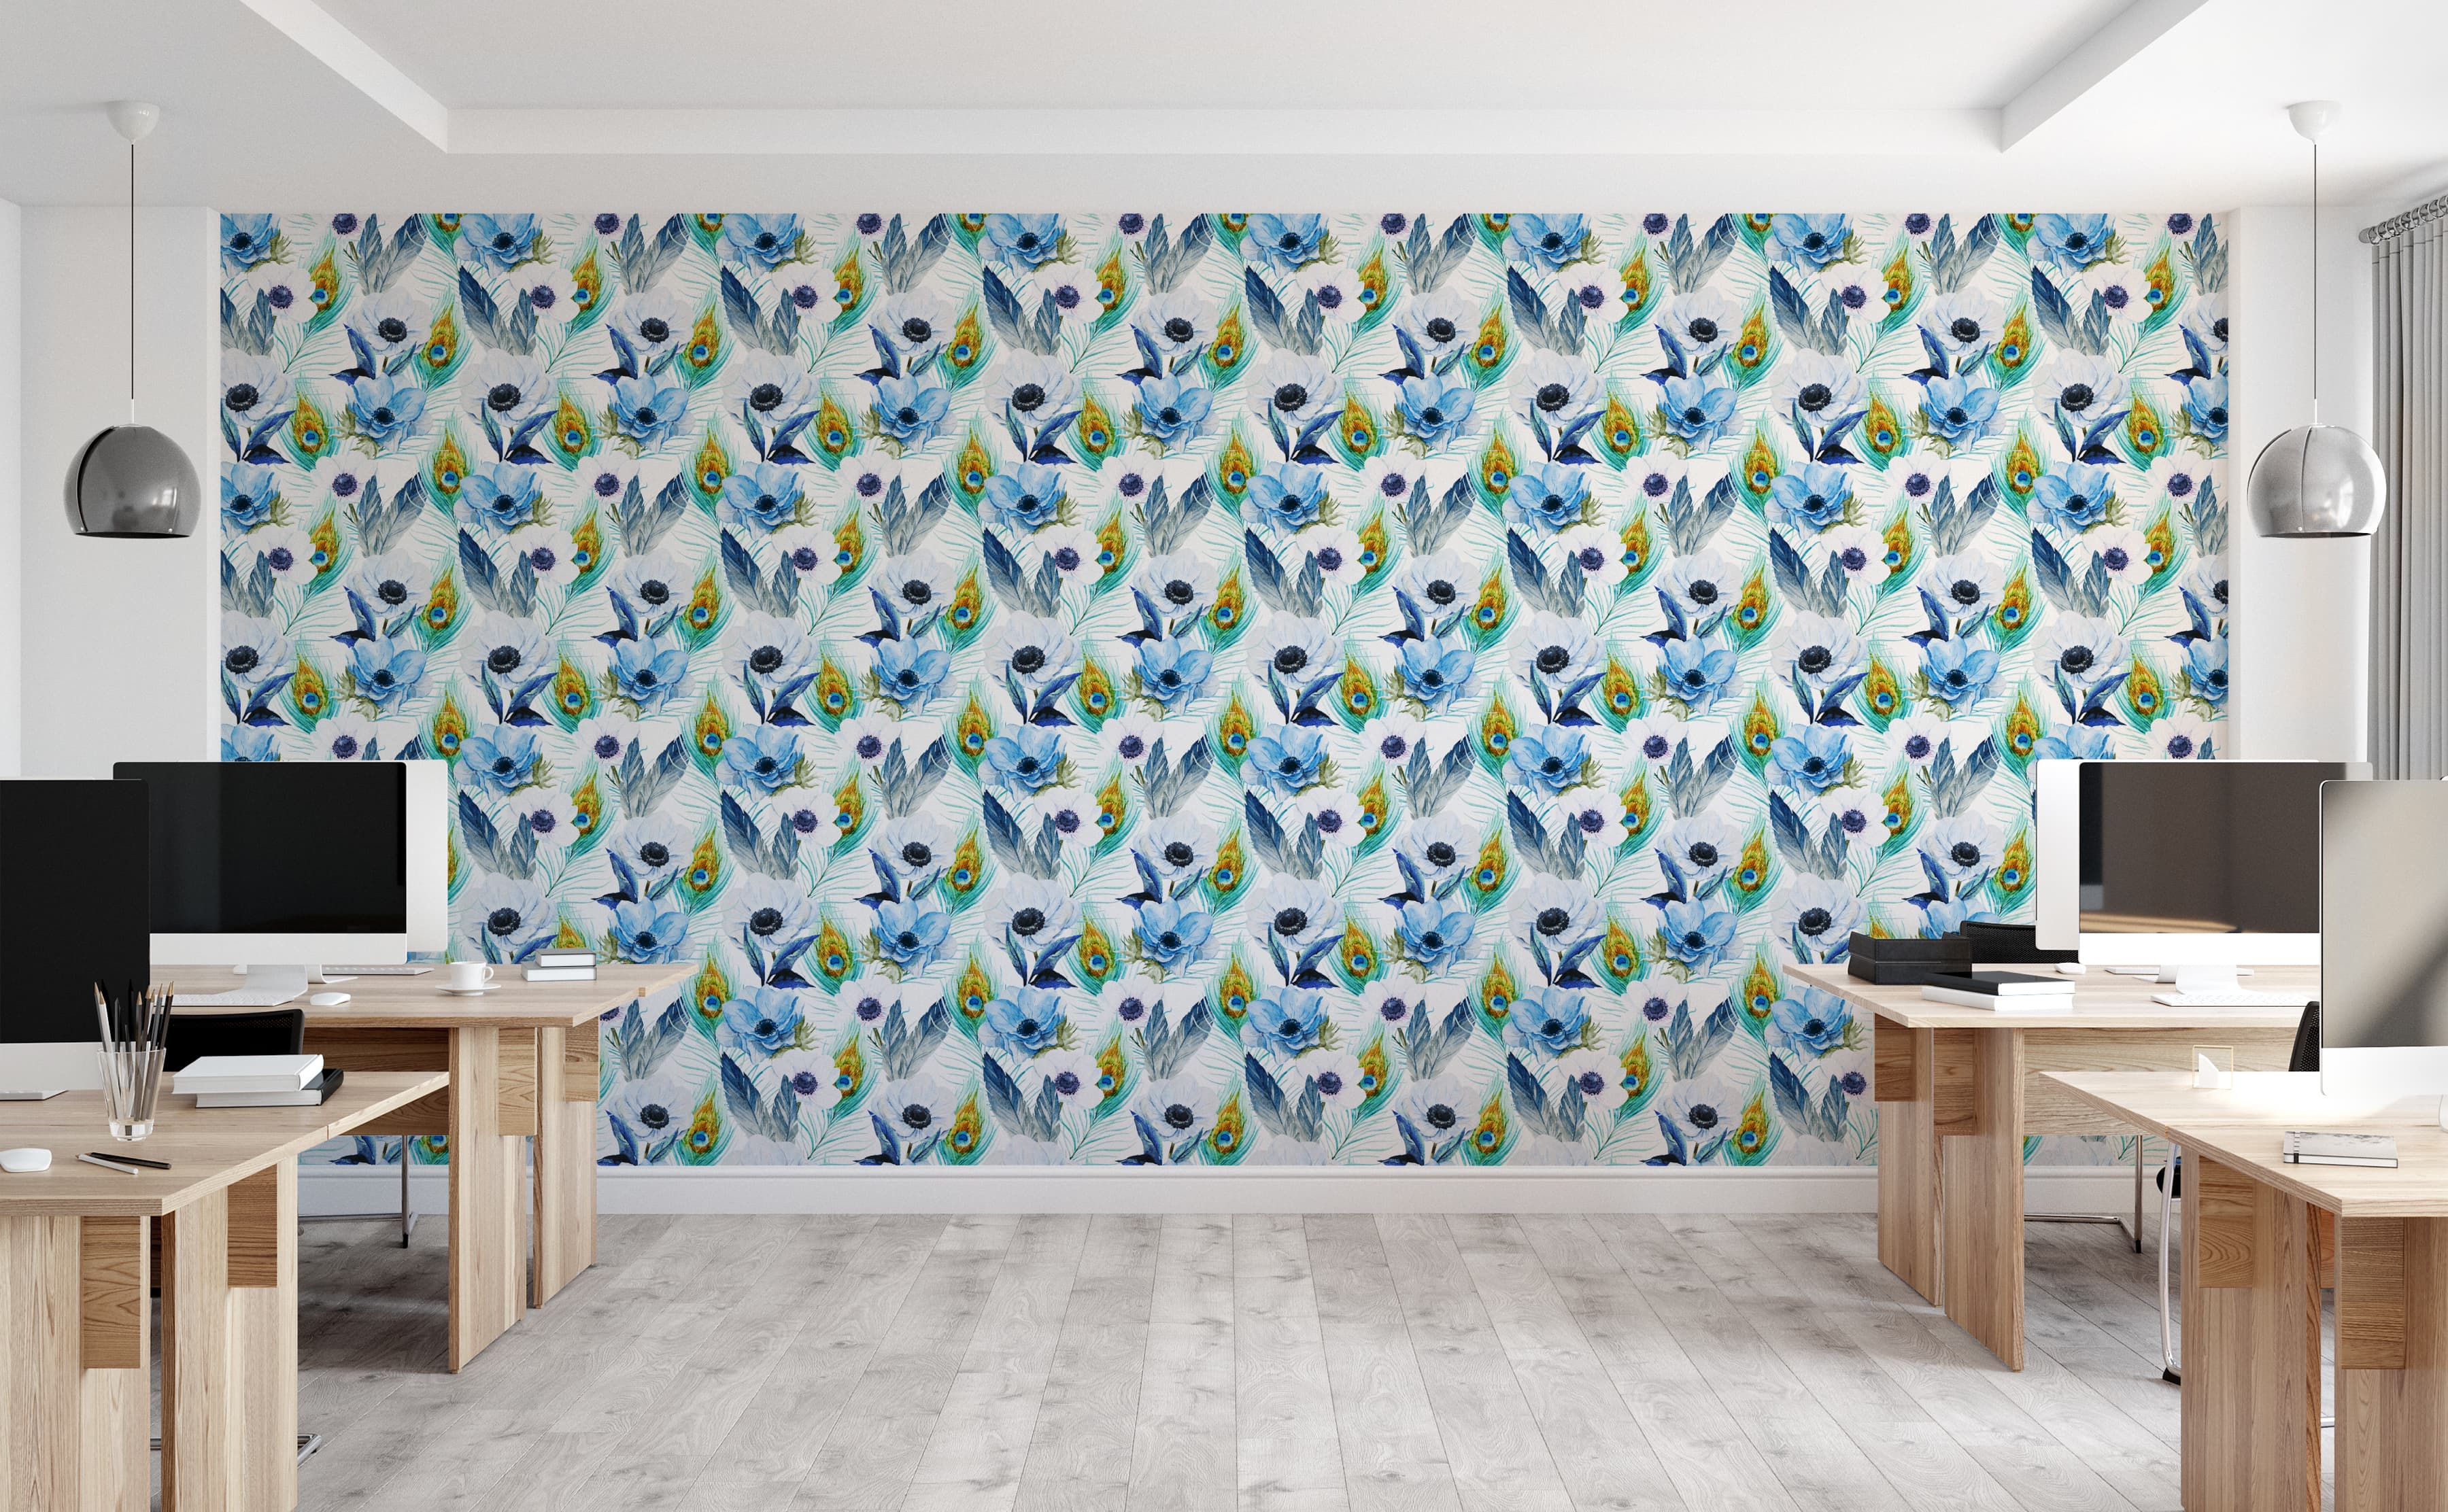 Tempaper Peonies Peacock Blue  Gold Peel and Stick Wallpaper Covers 28  Sq Ft PE10633  The Home Depot